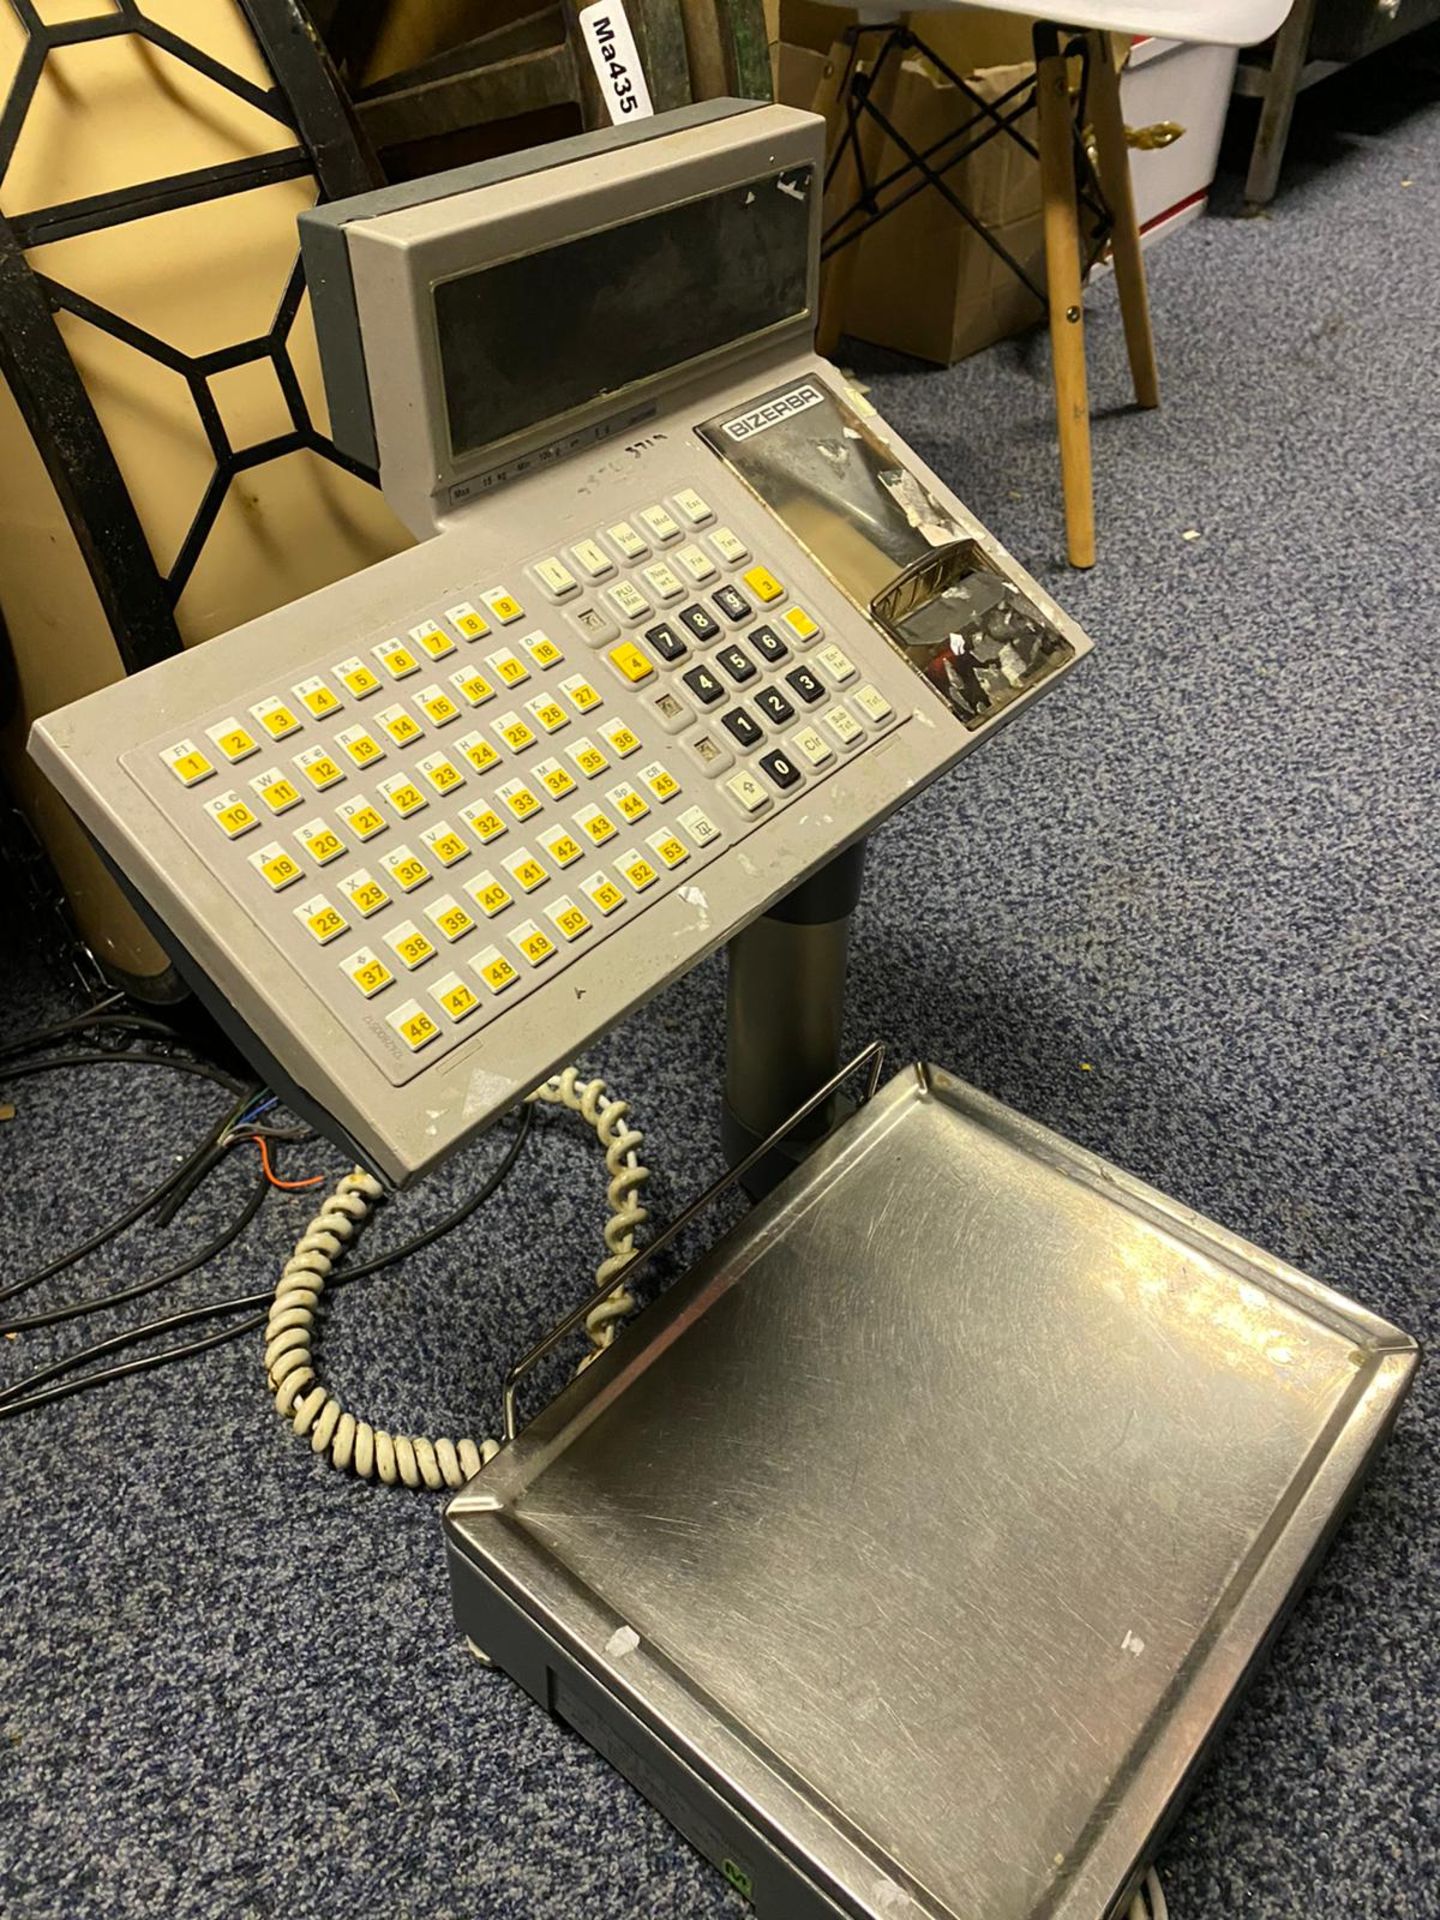 1 x Bizerba SC-H Basic Retail Weighing Scale - Used Condition - Location: Altrincham WA14 - - Image 6 of 6